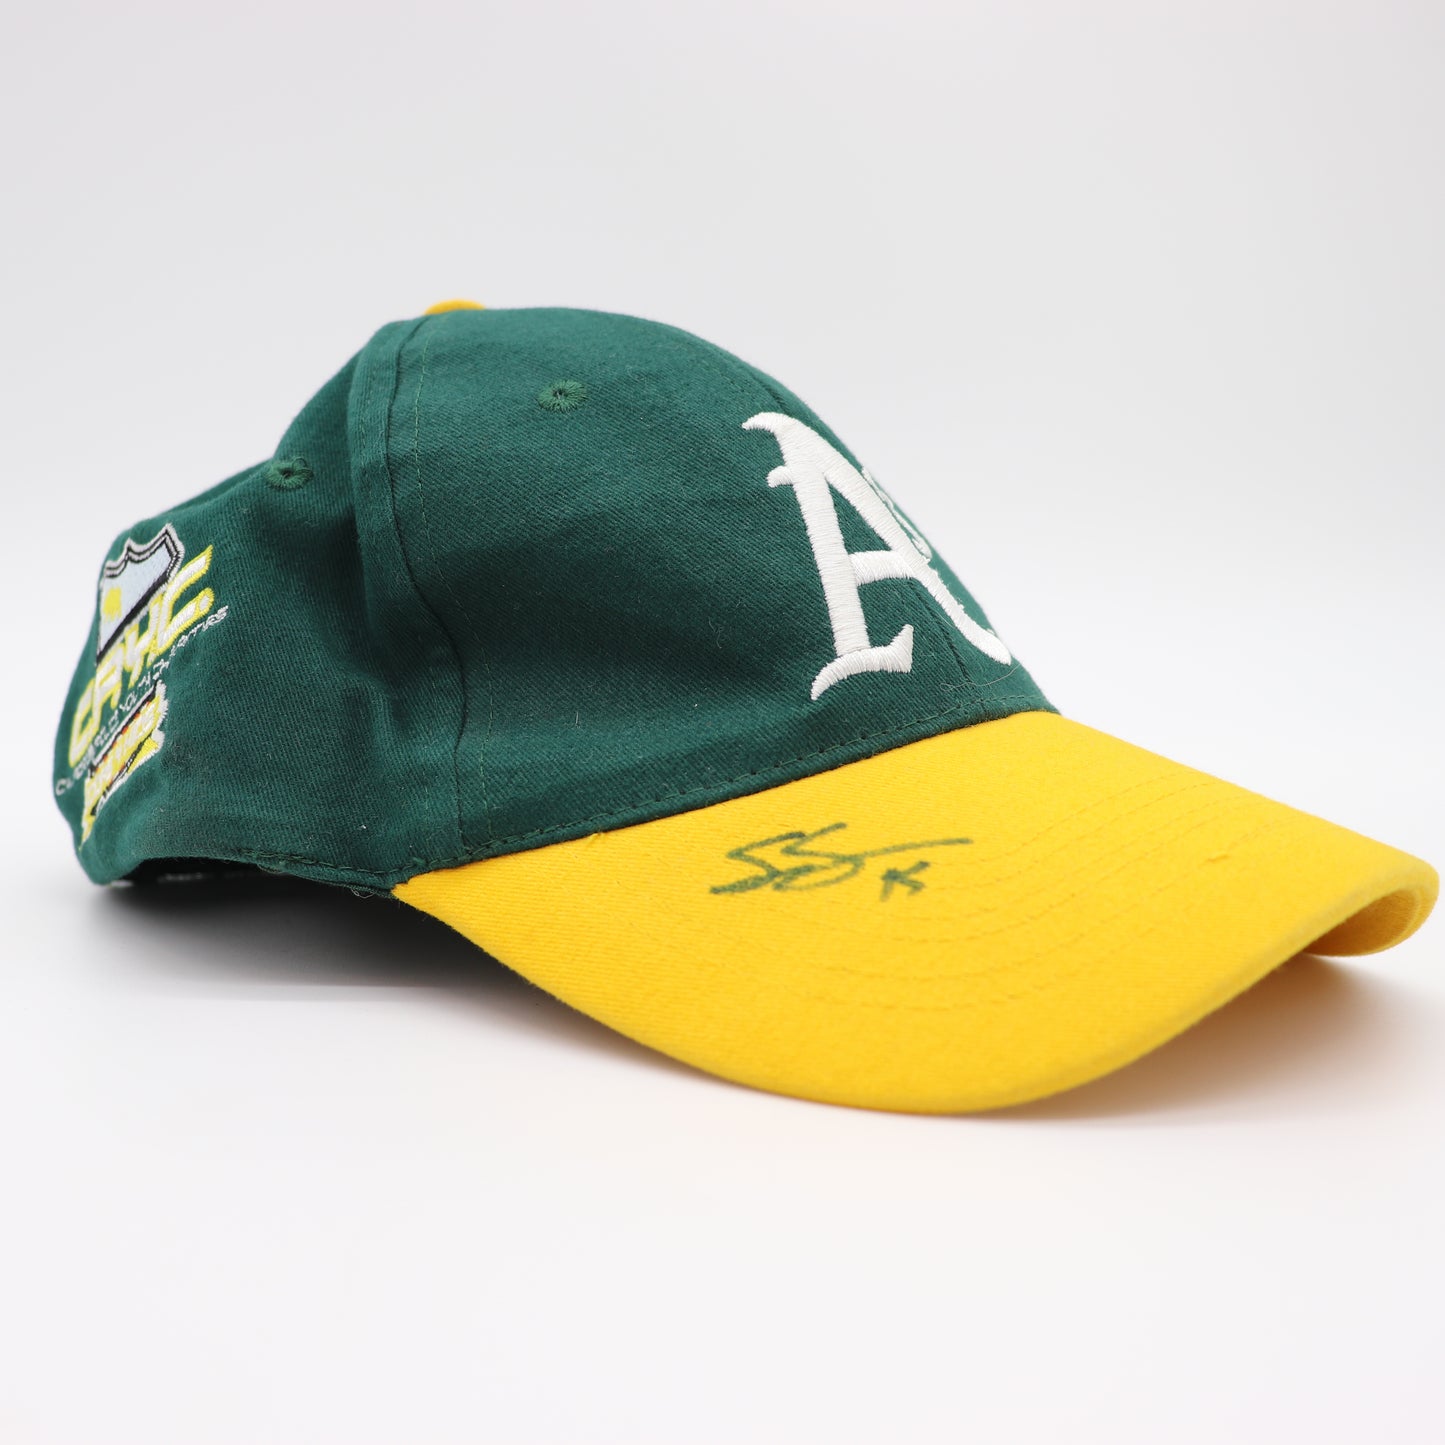 2012-13 Game Worn & Autographed Seth Smith Oakland A’s Cap, Size 7 ⅜